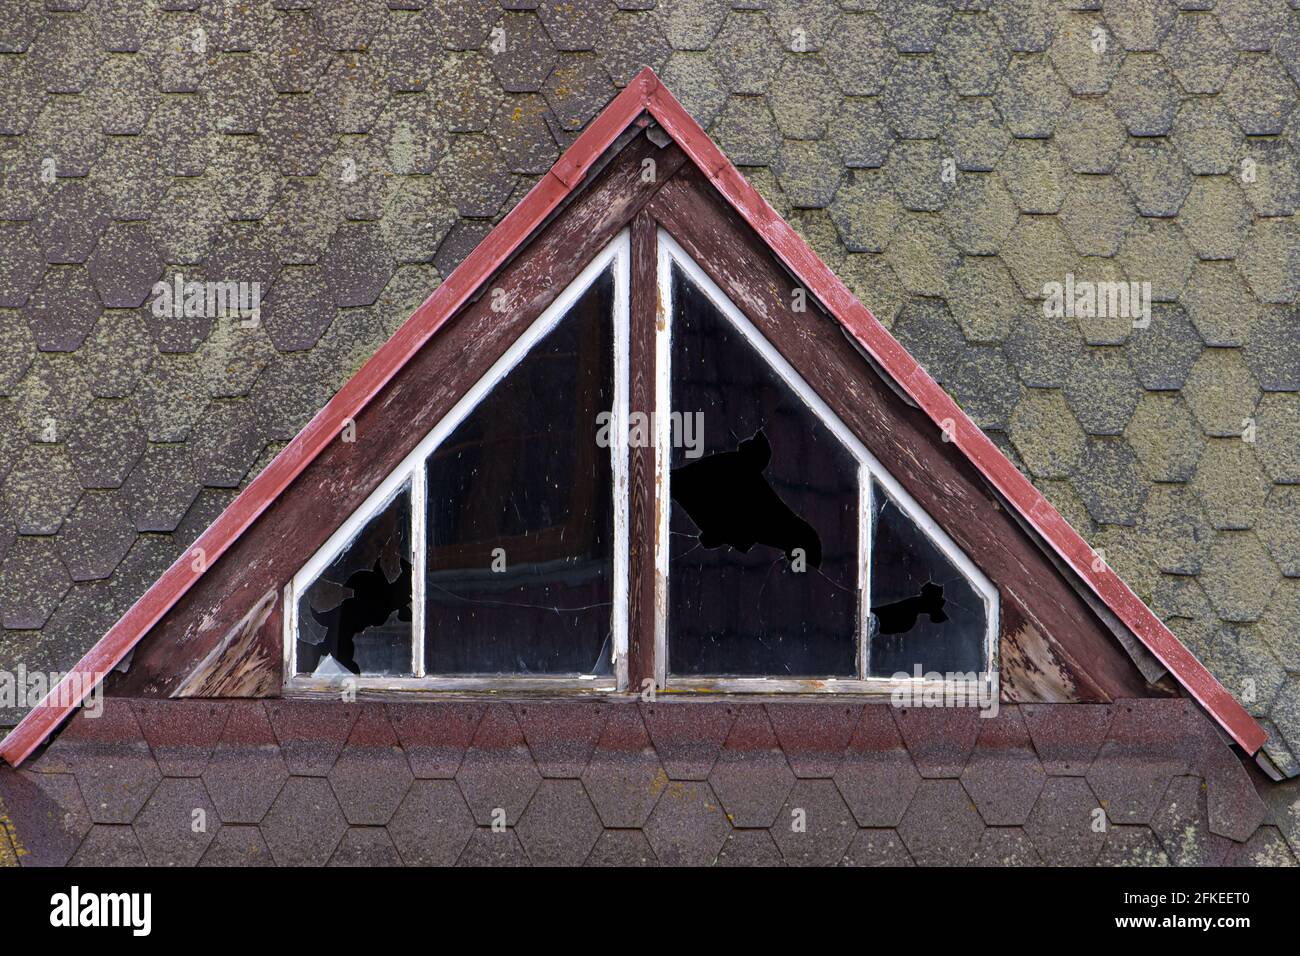 The dormer with damaged glass in the windows on a older roof. Stock Photo